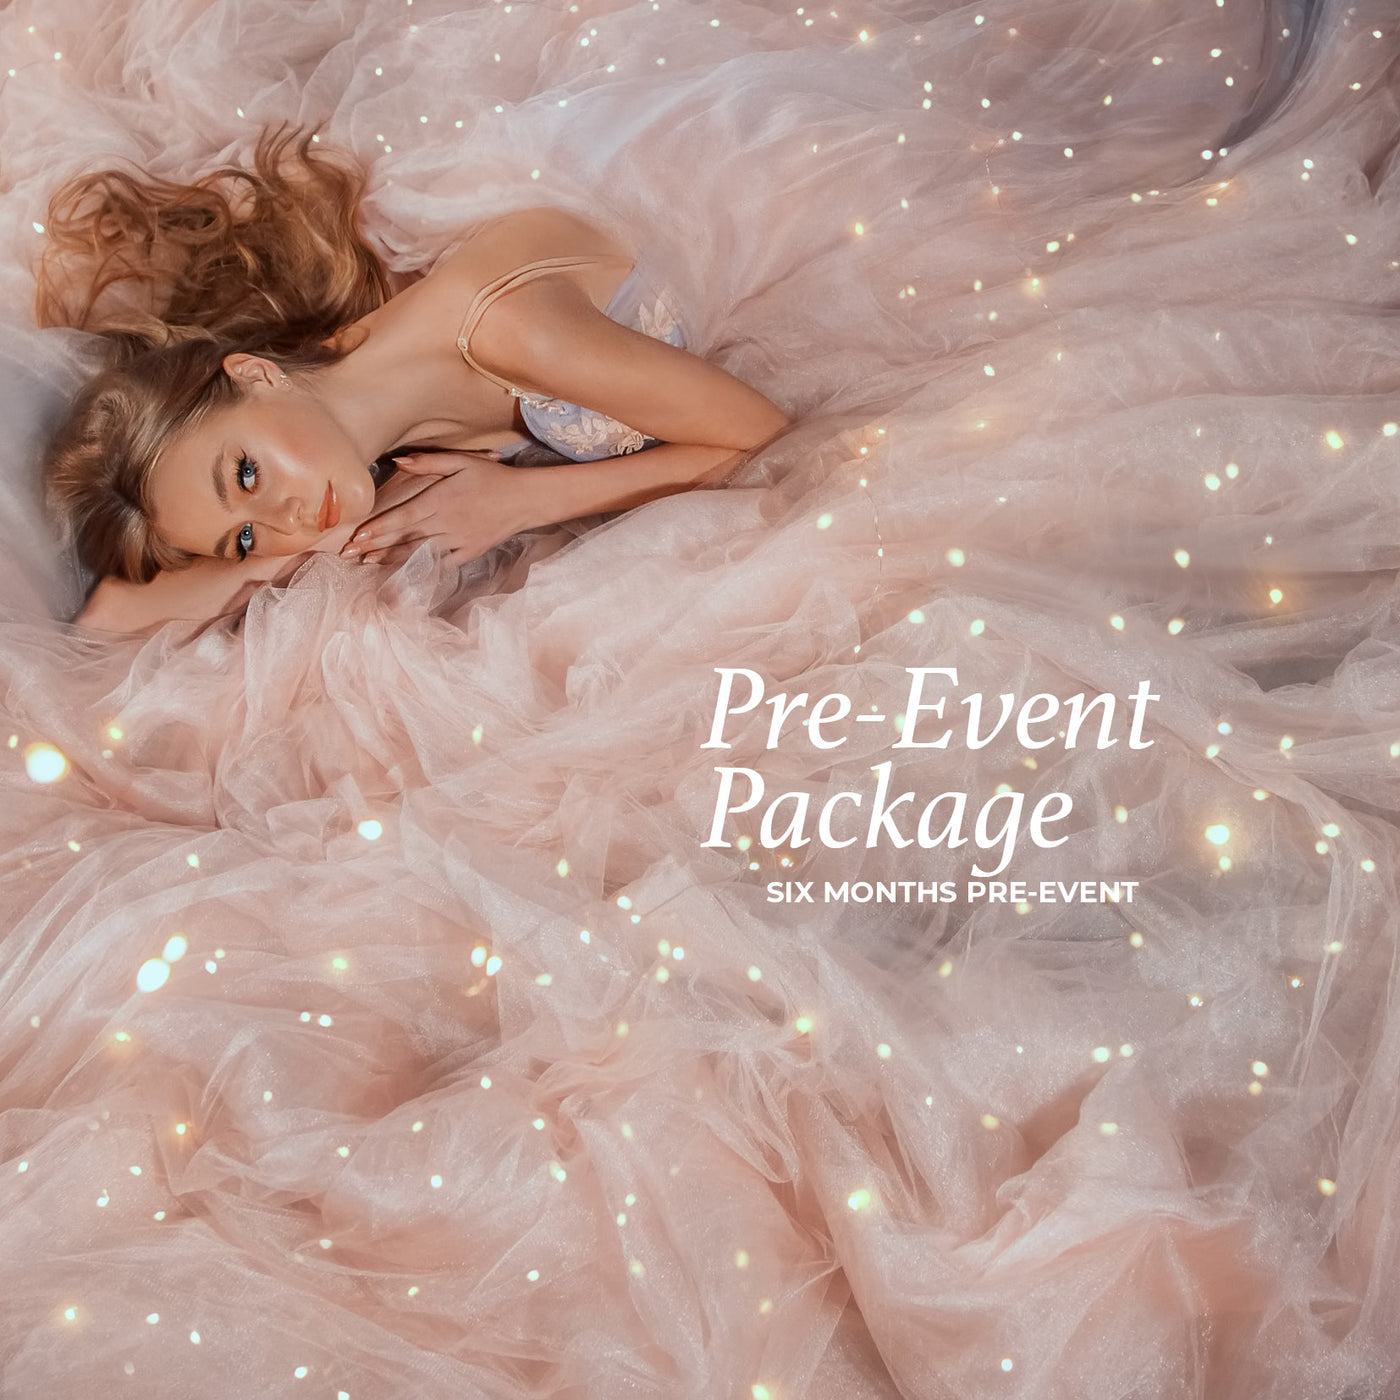 Special Event Package - 6 Months Pre-Event